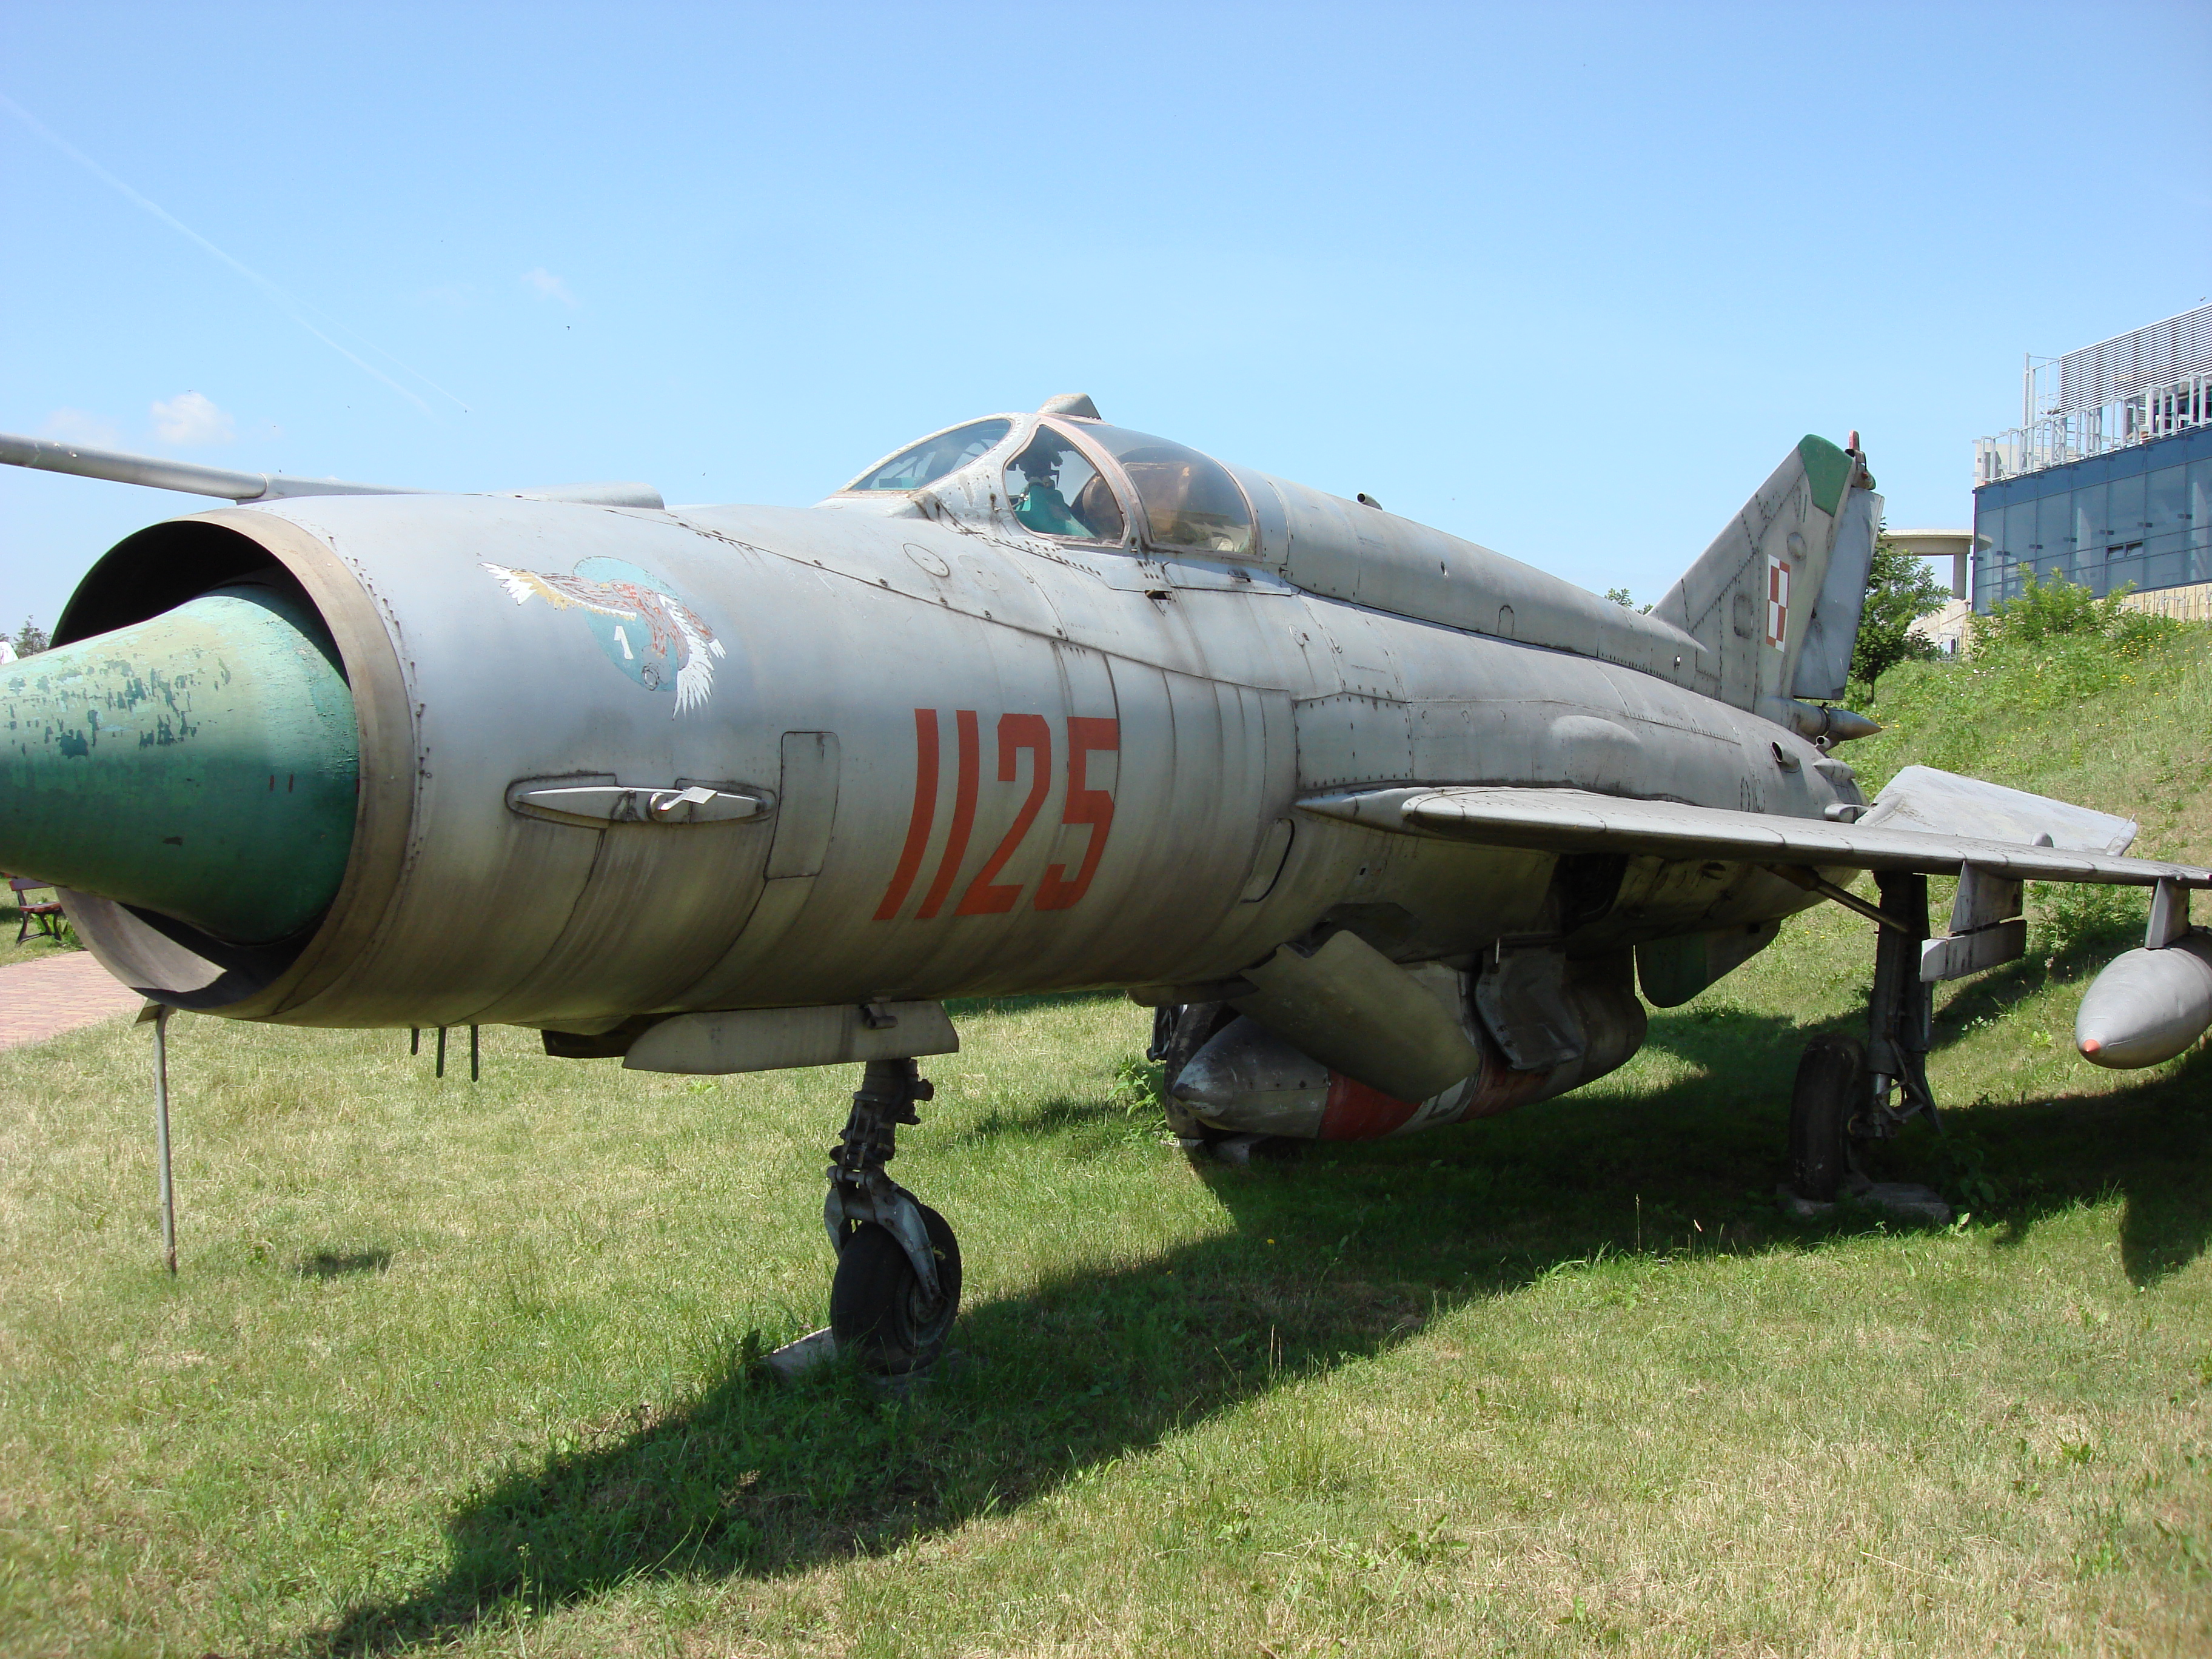 MiG-21 R nb 1125. The emblem of the 1st Squadron of the 32nd Regiment on the fuselage. Czyżyny 2007. Photo by Karol Placha Hetman